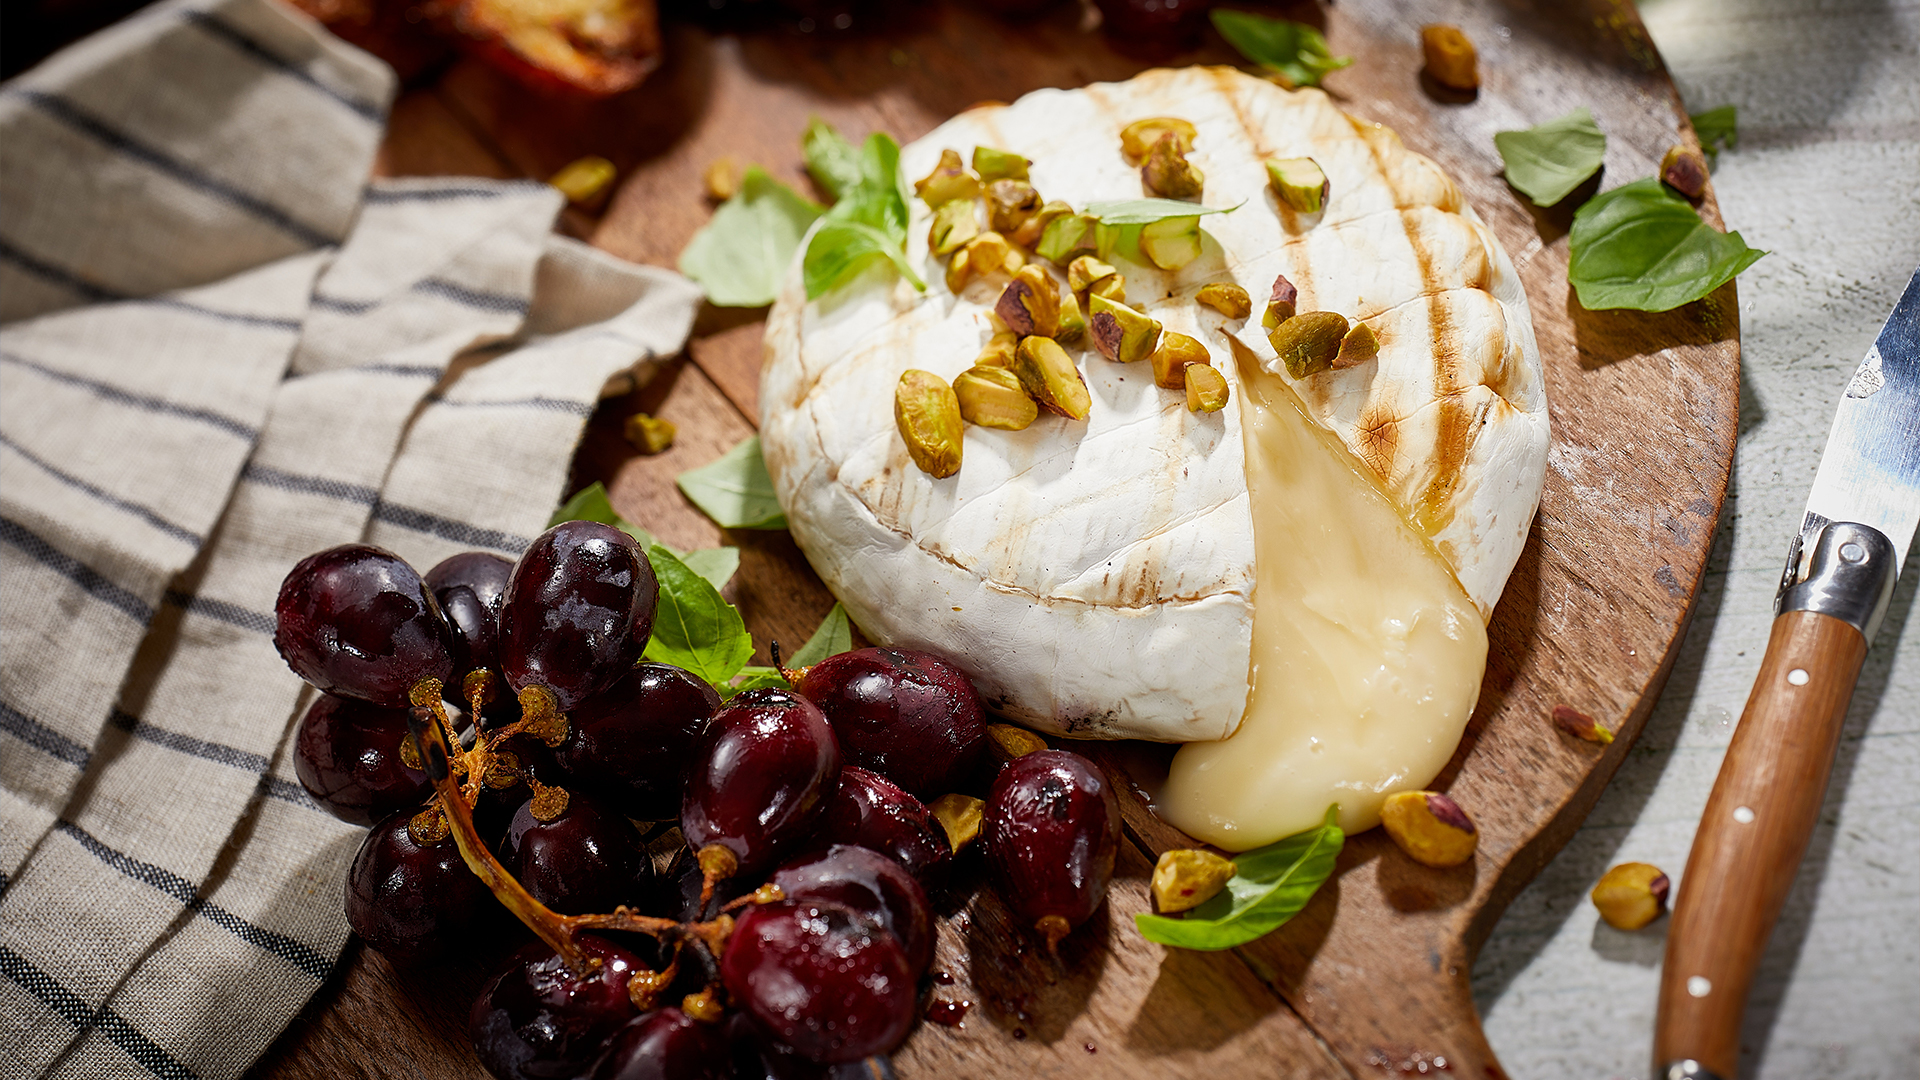 Grilled brie with grapes and pistachios